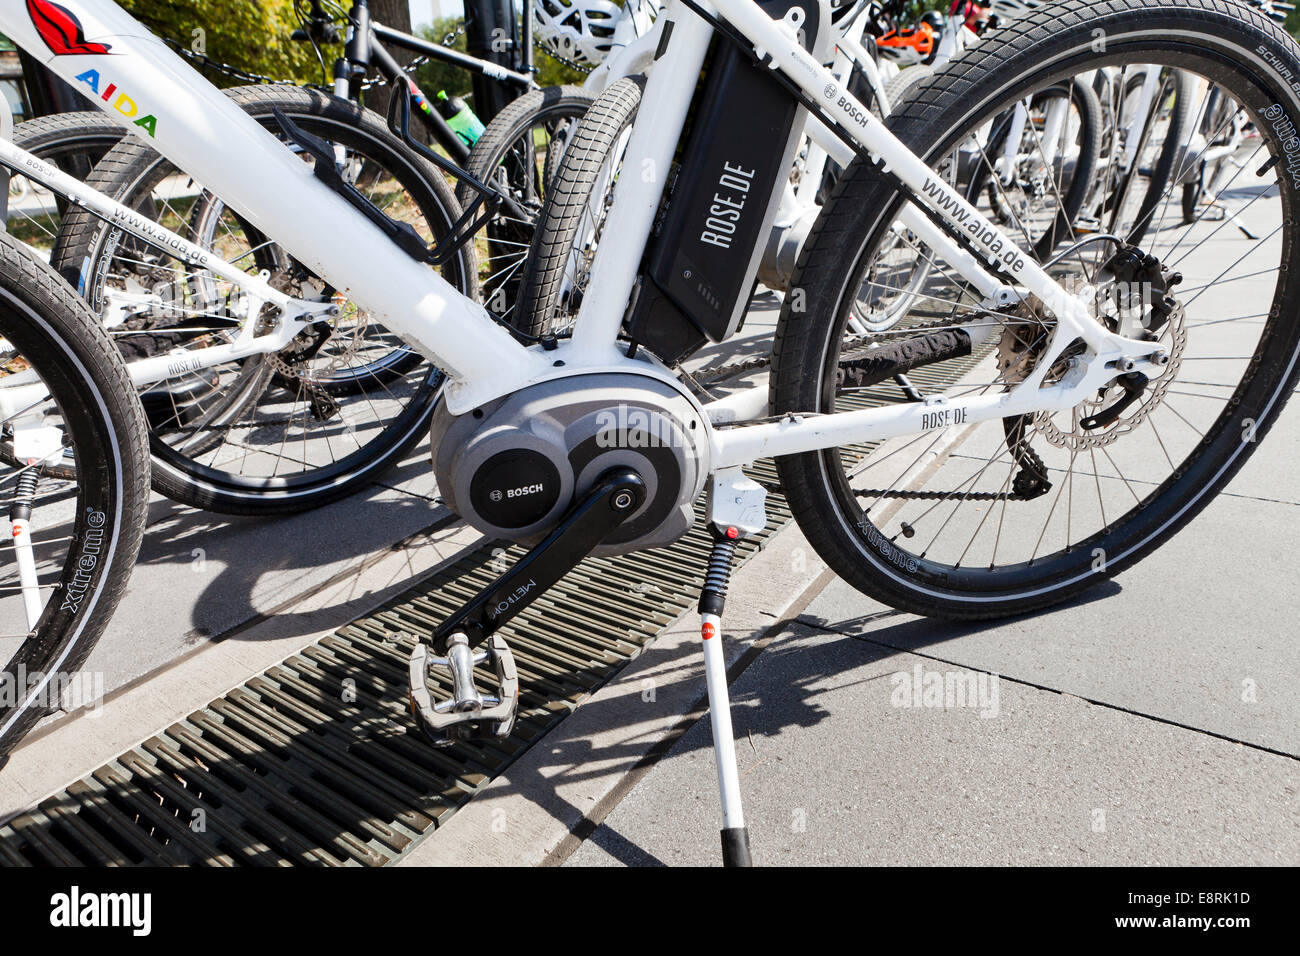 Electric Bicycles High Resolution Stock Photography and Images - Alamy